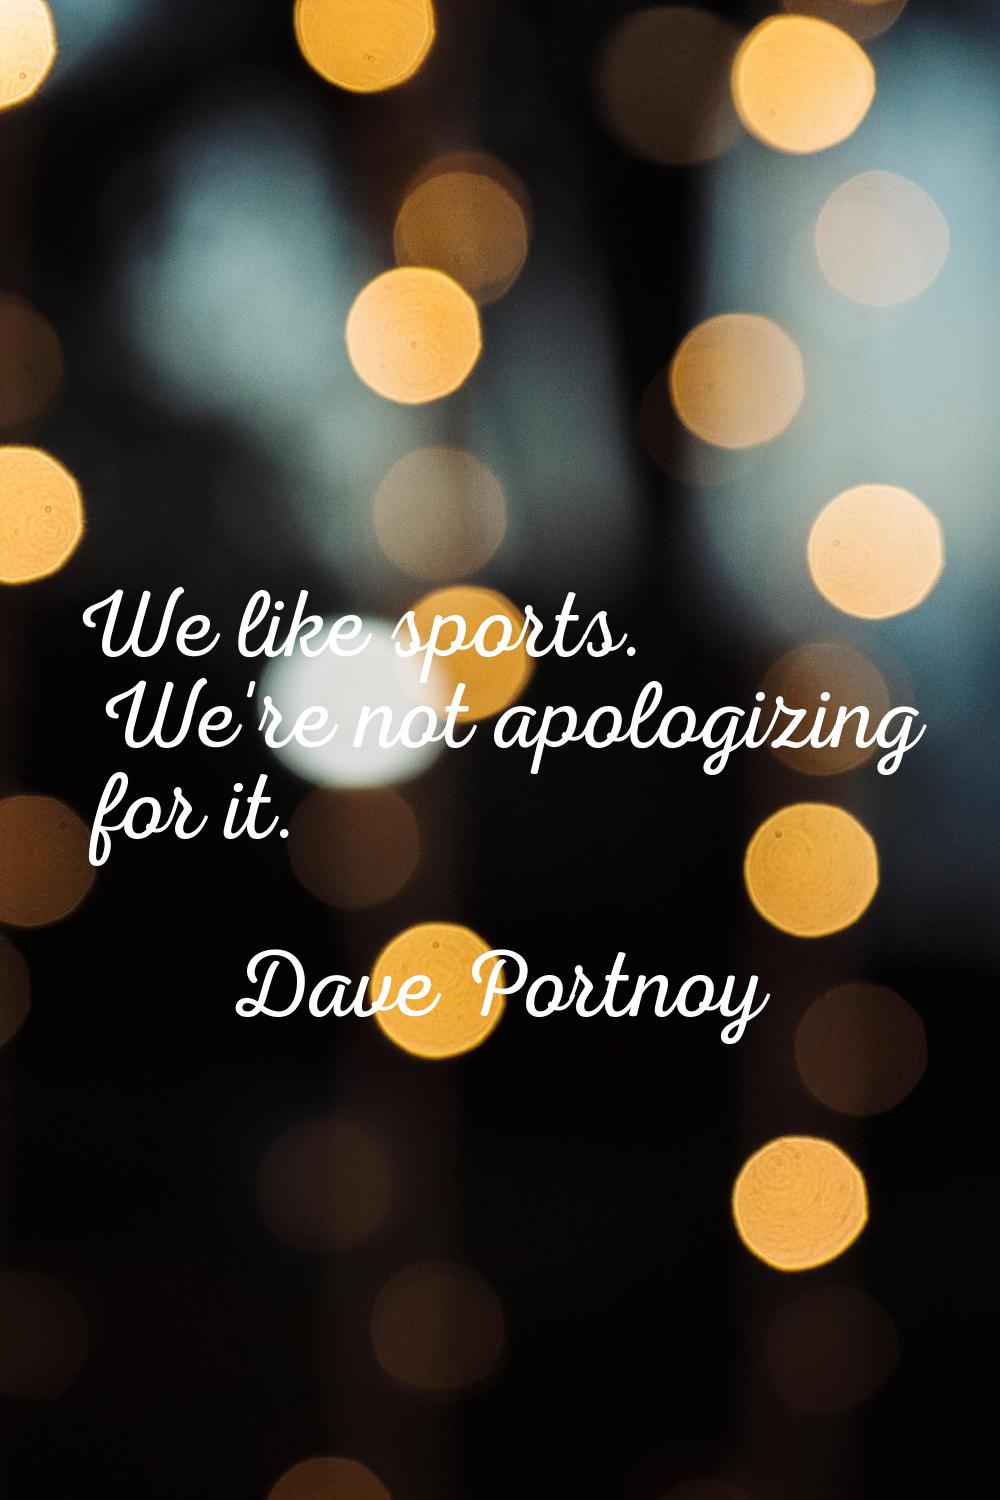 We like sports. We're not apologizing for it.